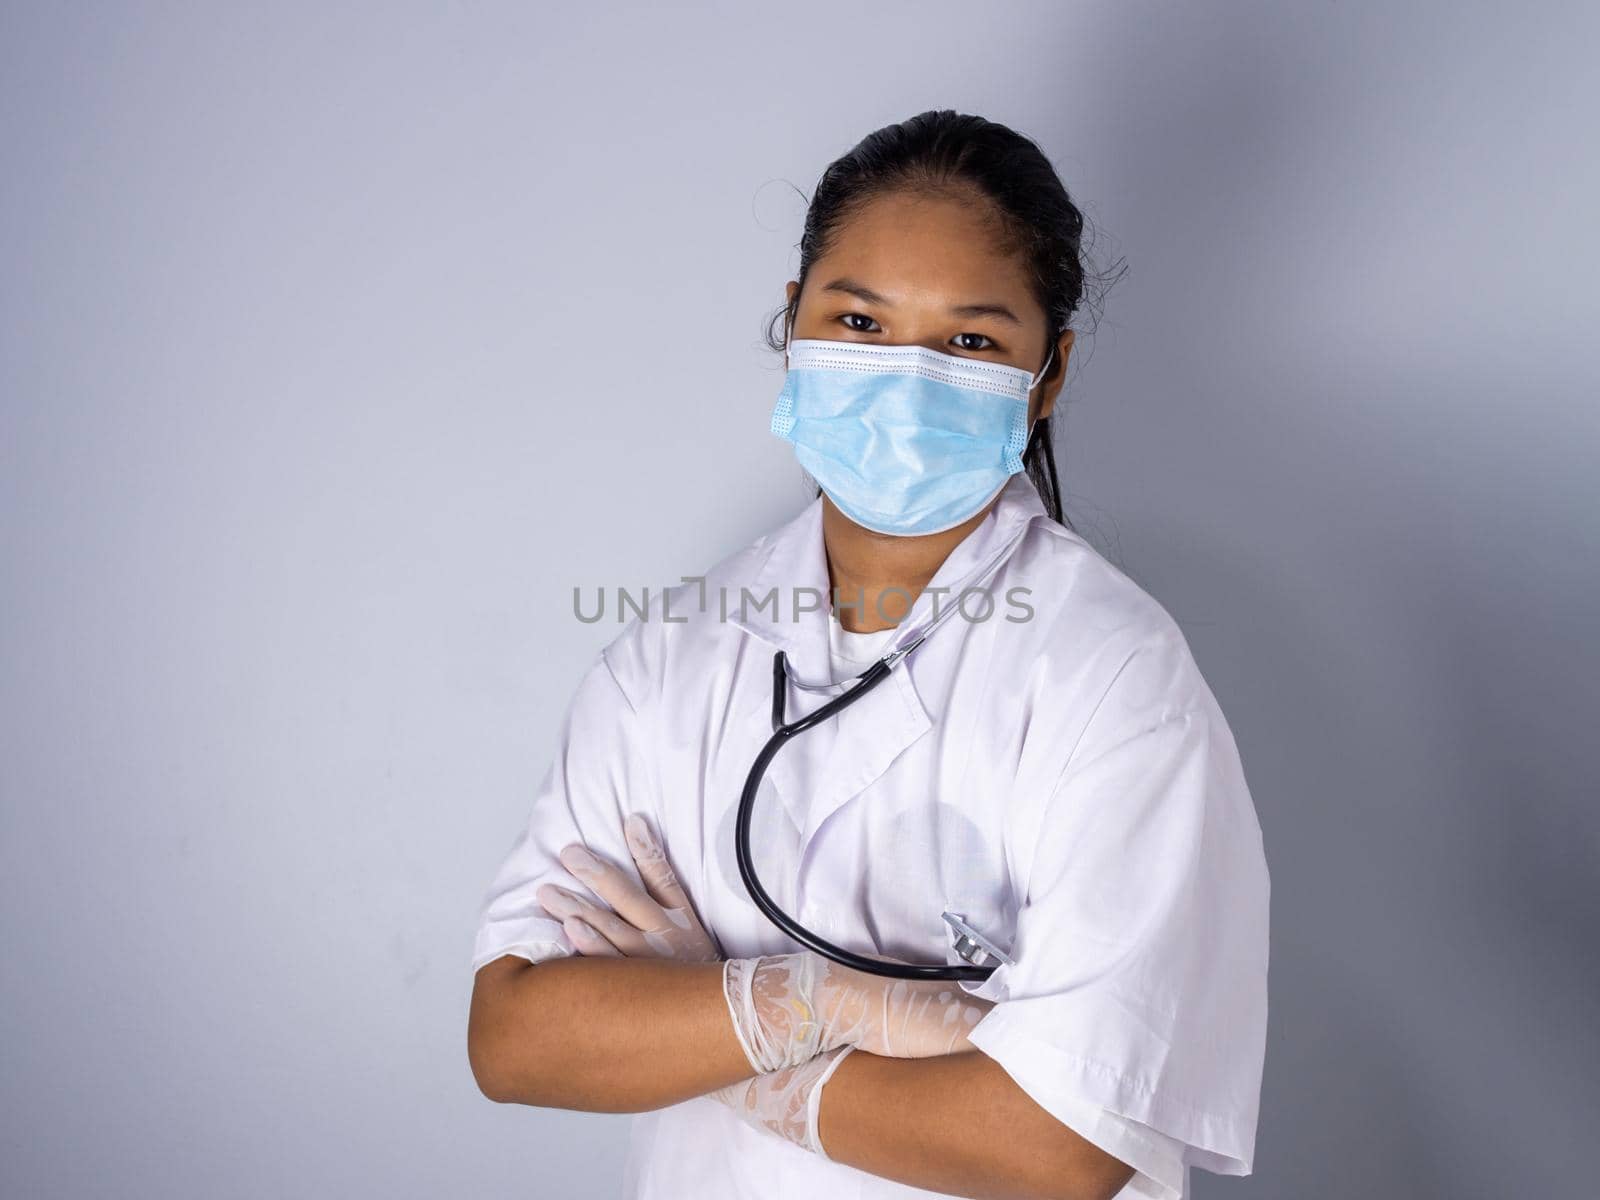 Studio portrait of a female doctor wearing a mask standing on a white background There was a slight light on his face.